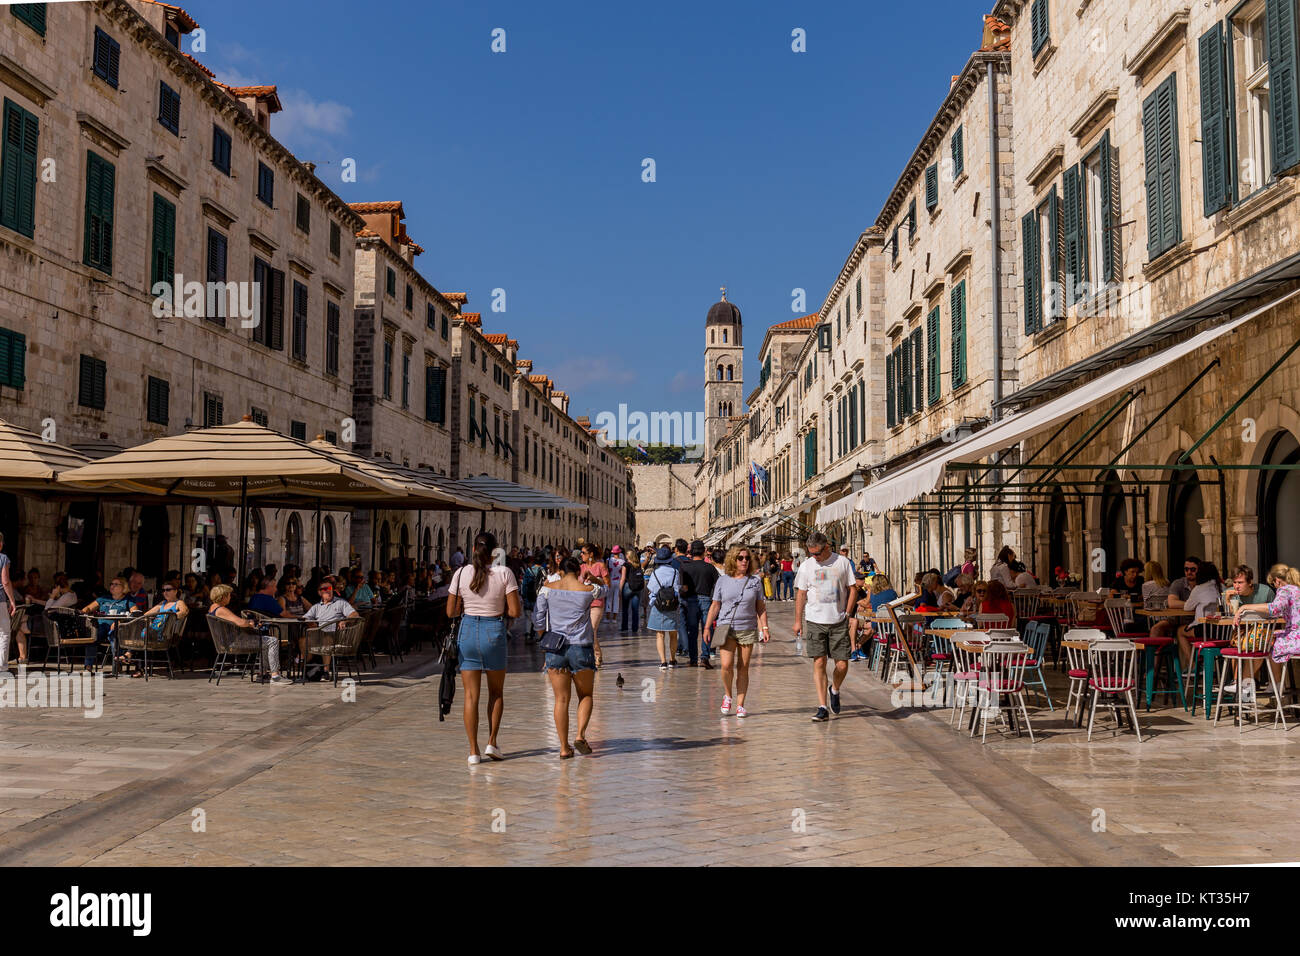 A town center streetview of the fortified and historical city of Dubrovnik, Croatia. The city is on the Unesco World Heritage List. Stock Photo